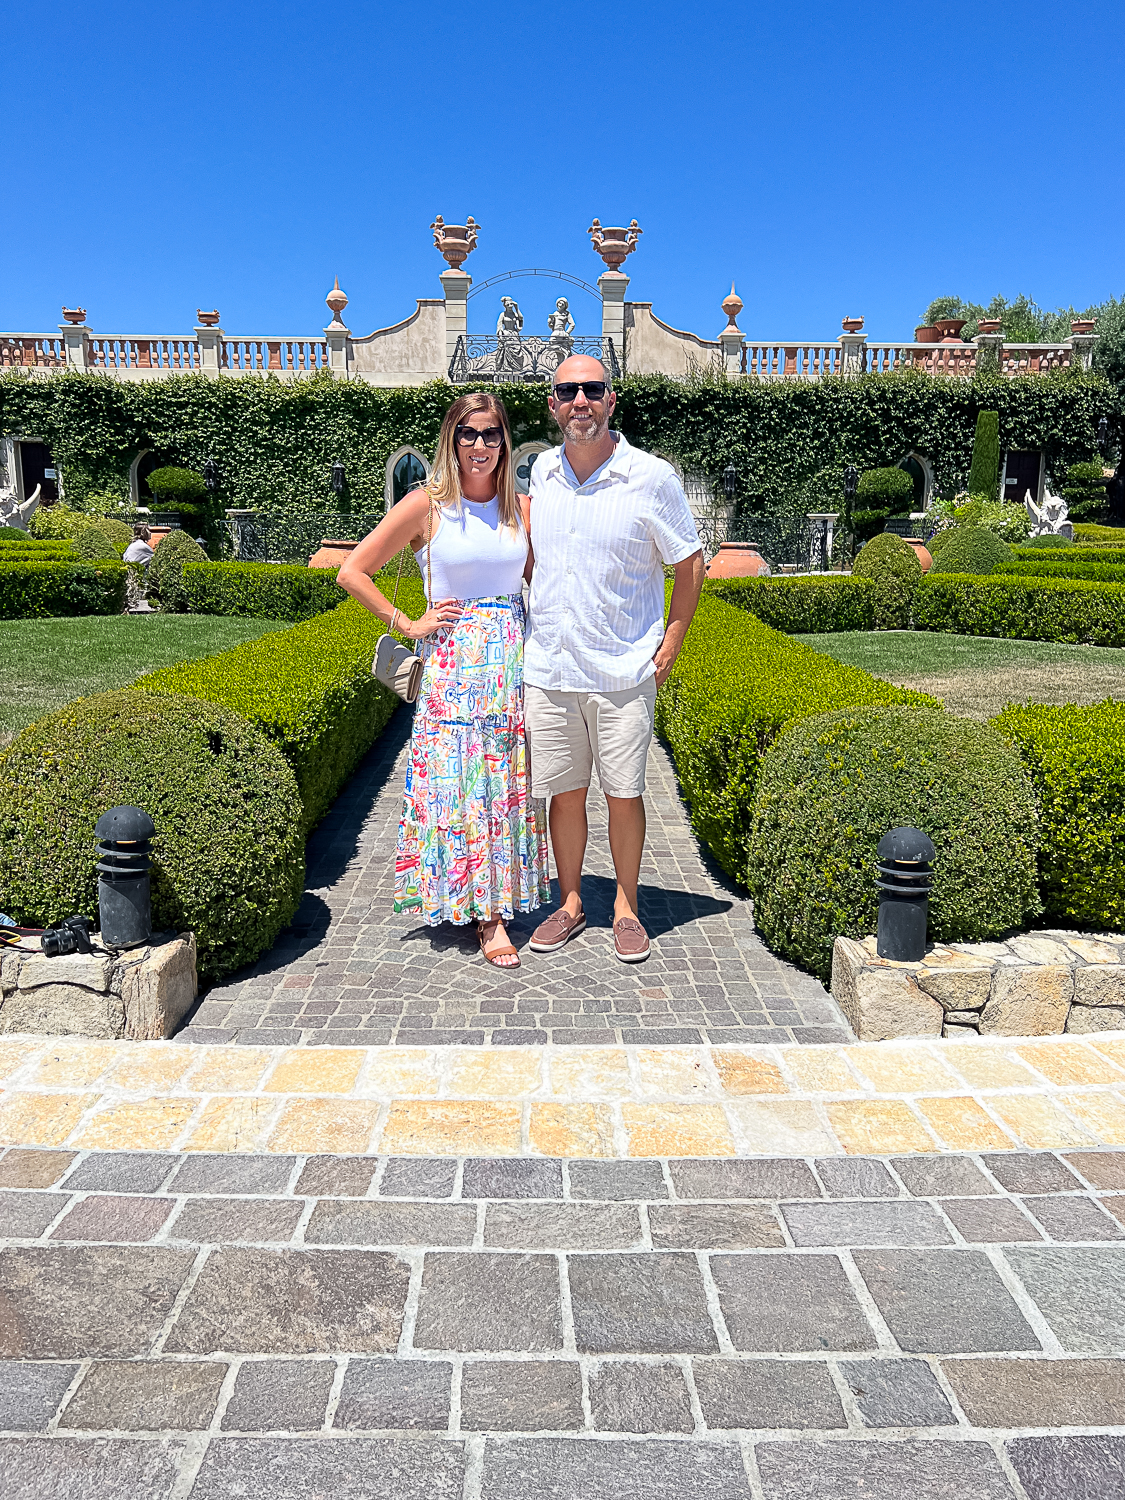 Pacific Globetrotters, budget family travel blog, shares their trip 48 hours in Napa.